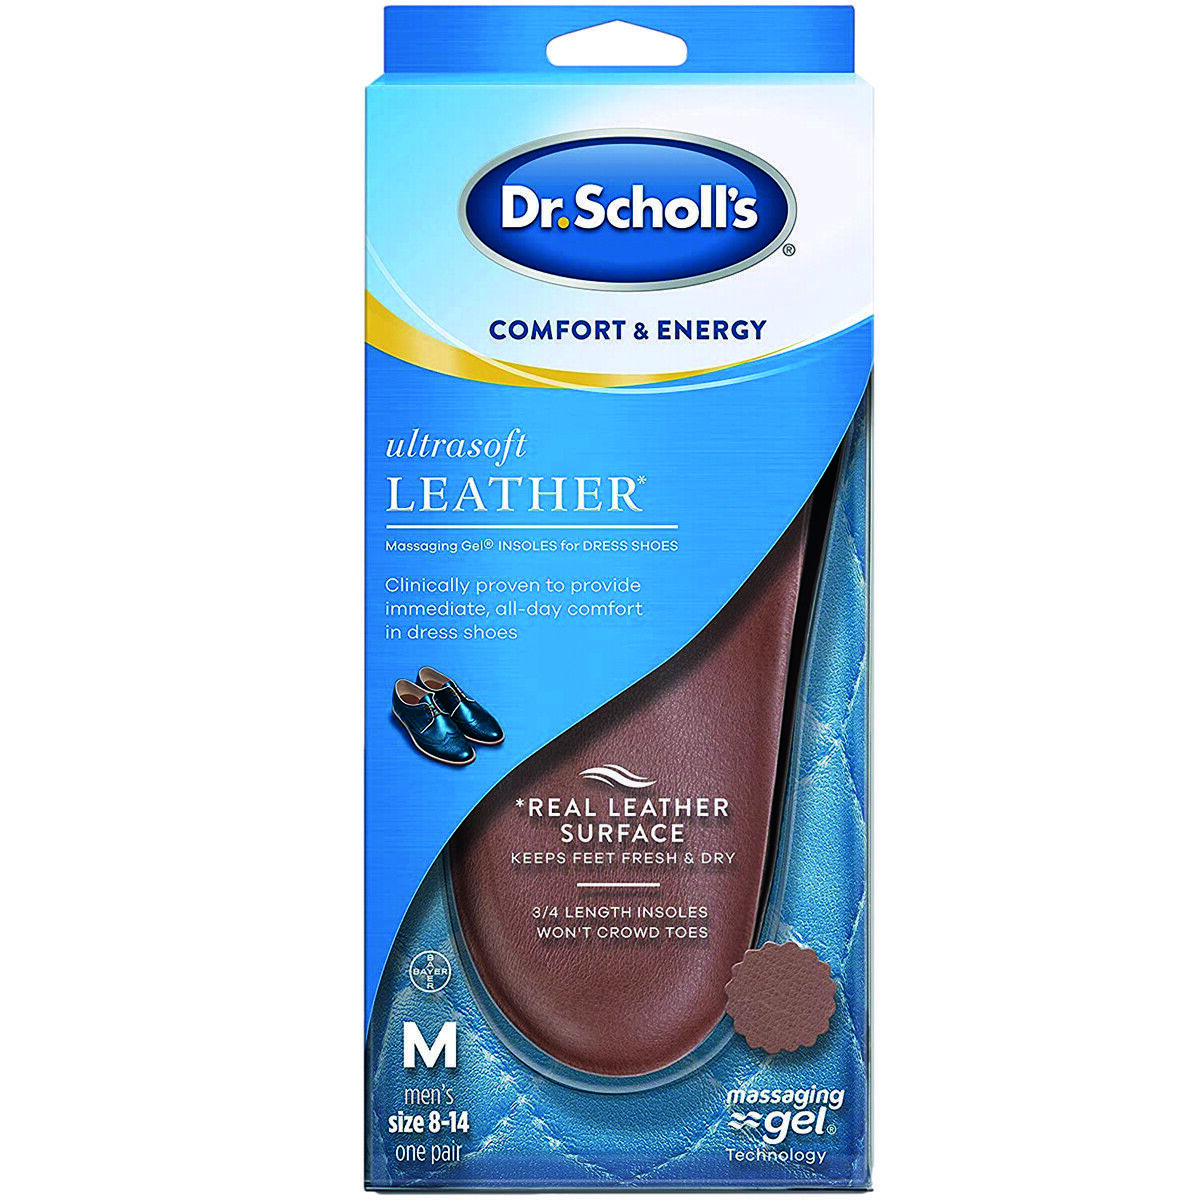 Dr. Scholl's Men’s Ultrasoft Leather Insoles Shoe Inserts For Dress Shoes